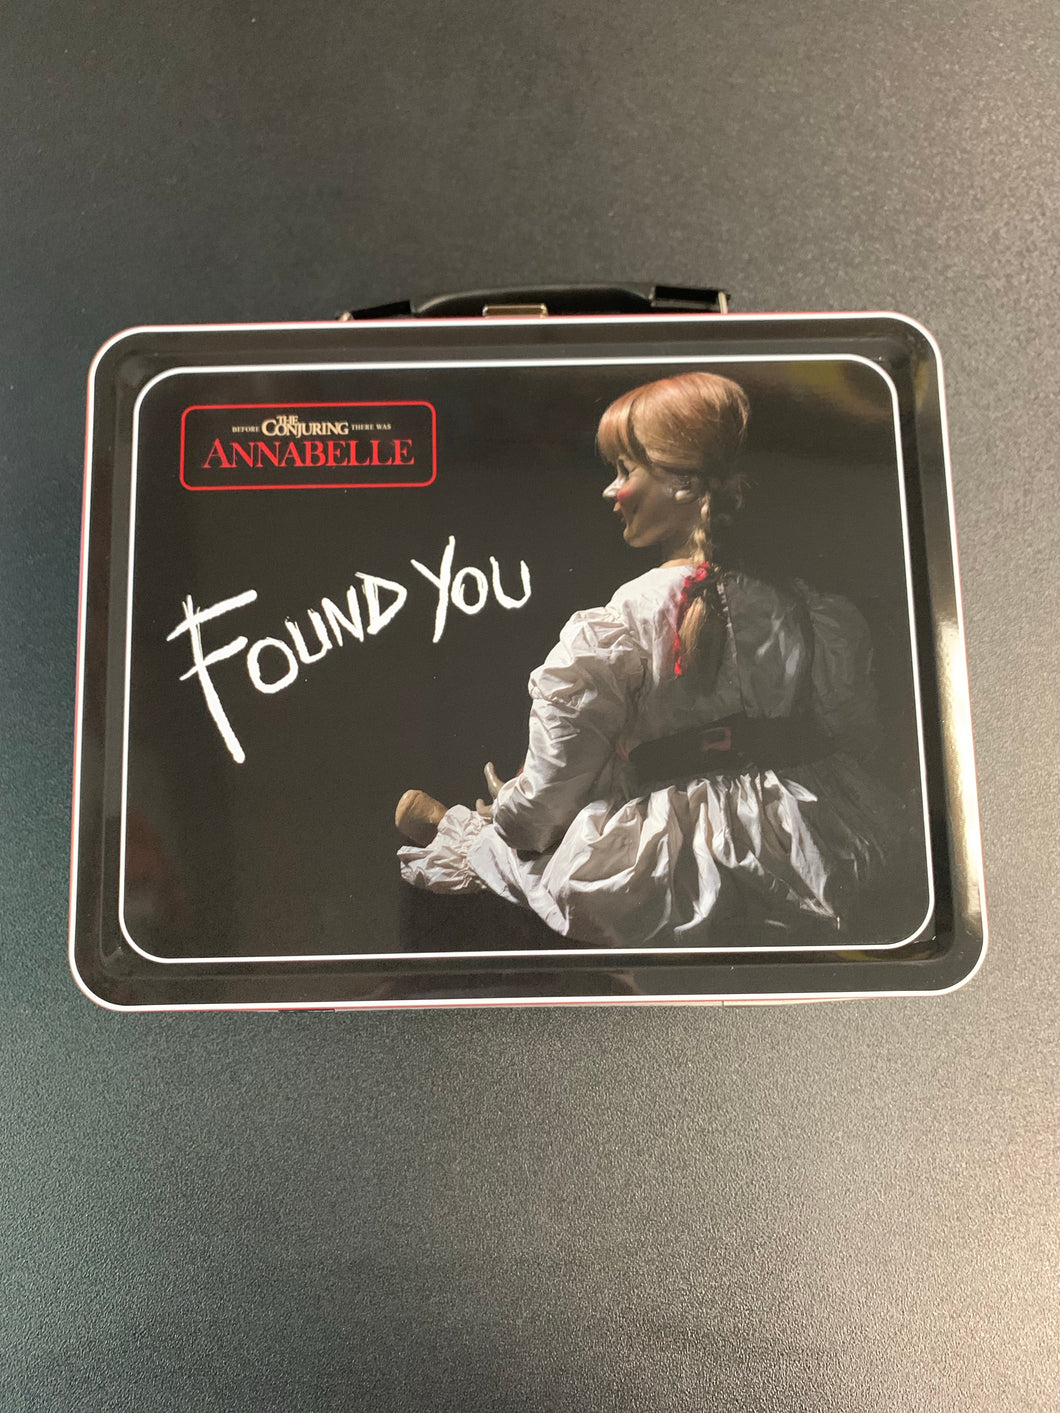 ANNABELLE THE CONJURING LUNCHBOX TIN TOTE